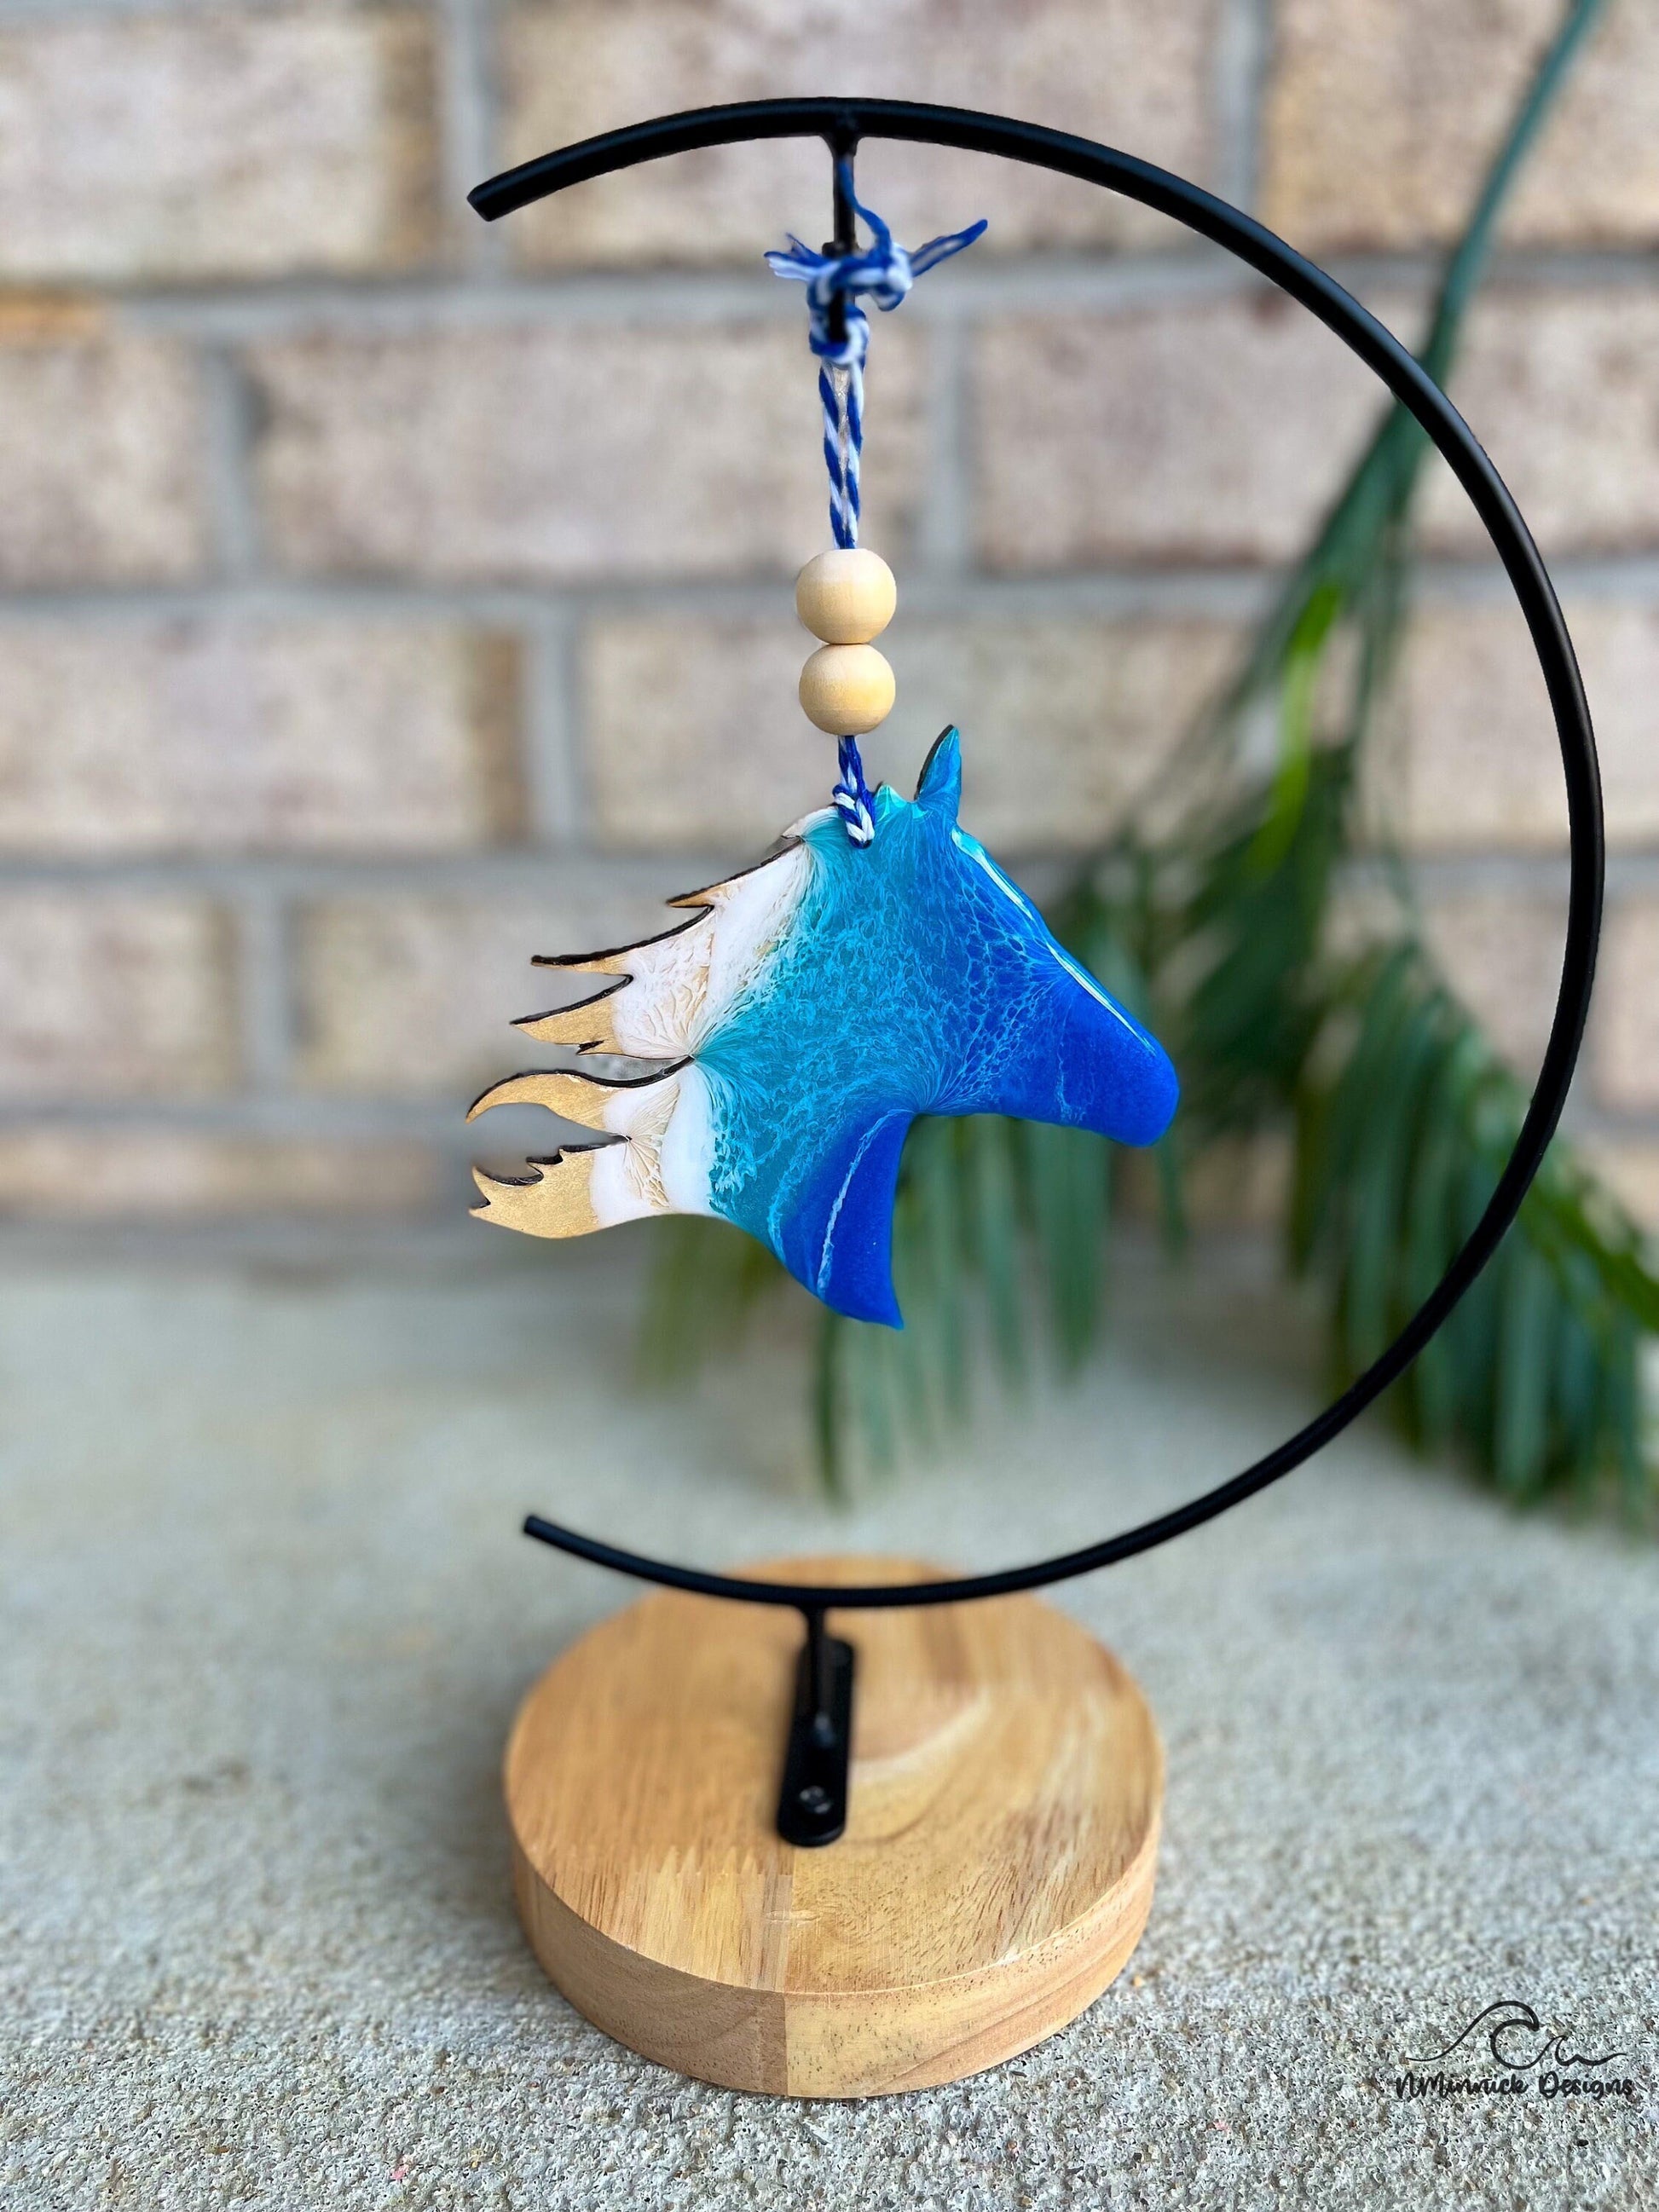 Horse Ornament with ocean resin art hanging on an ornament stand.